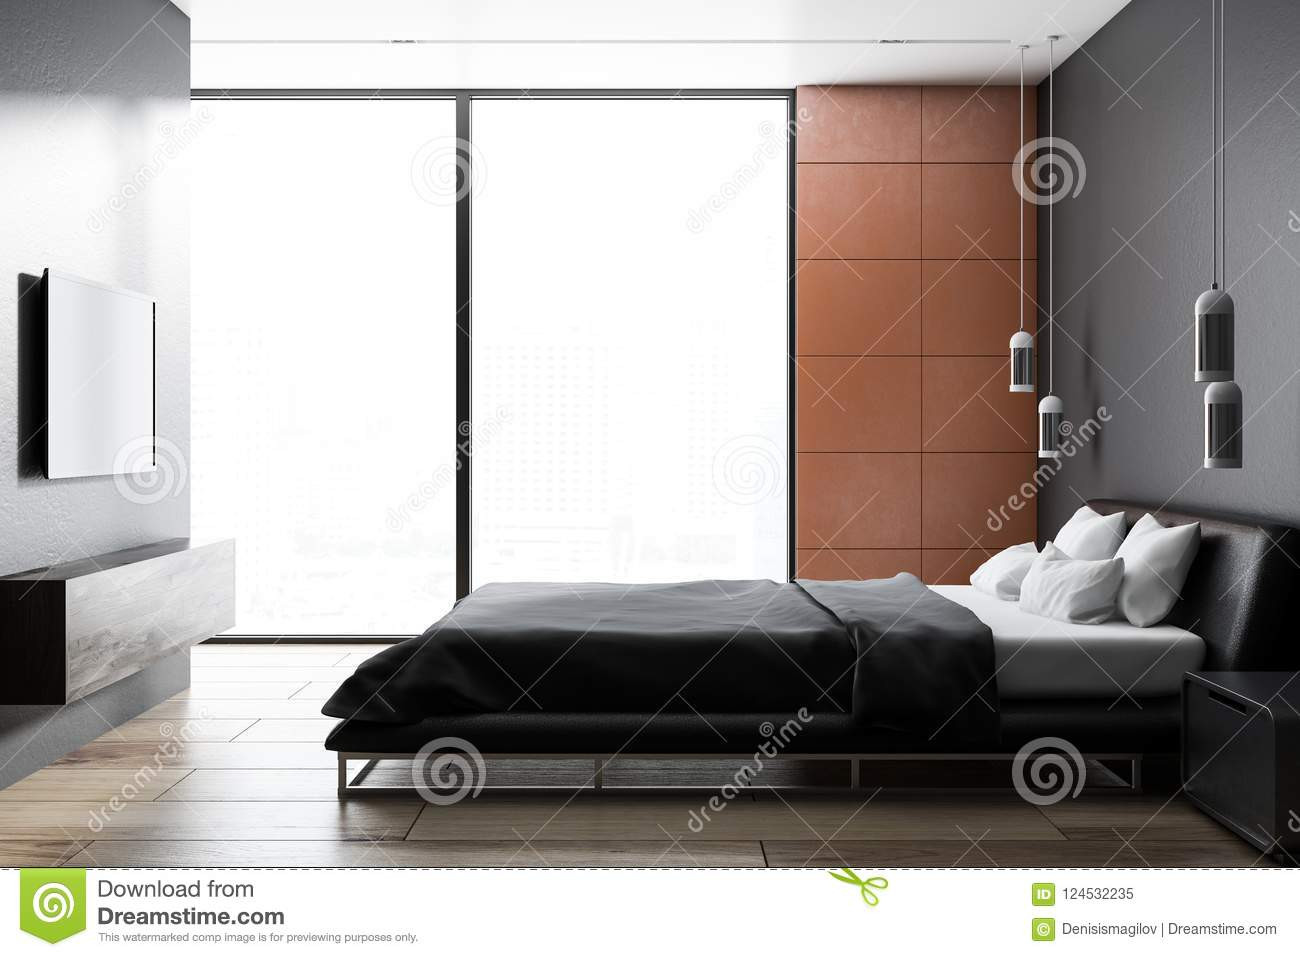 16 Spectacular Master Bedroom Hardwood Floor Pictures 2024 free download master bedroom hardwood floor pictures of gray orange panoramic bedroom interior side view stock illustration with modern bedroom interior with orang tile walls a wooden floor gray master be